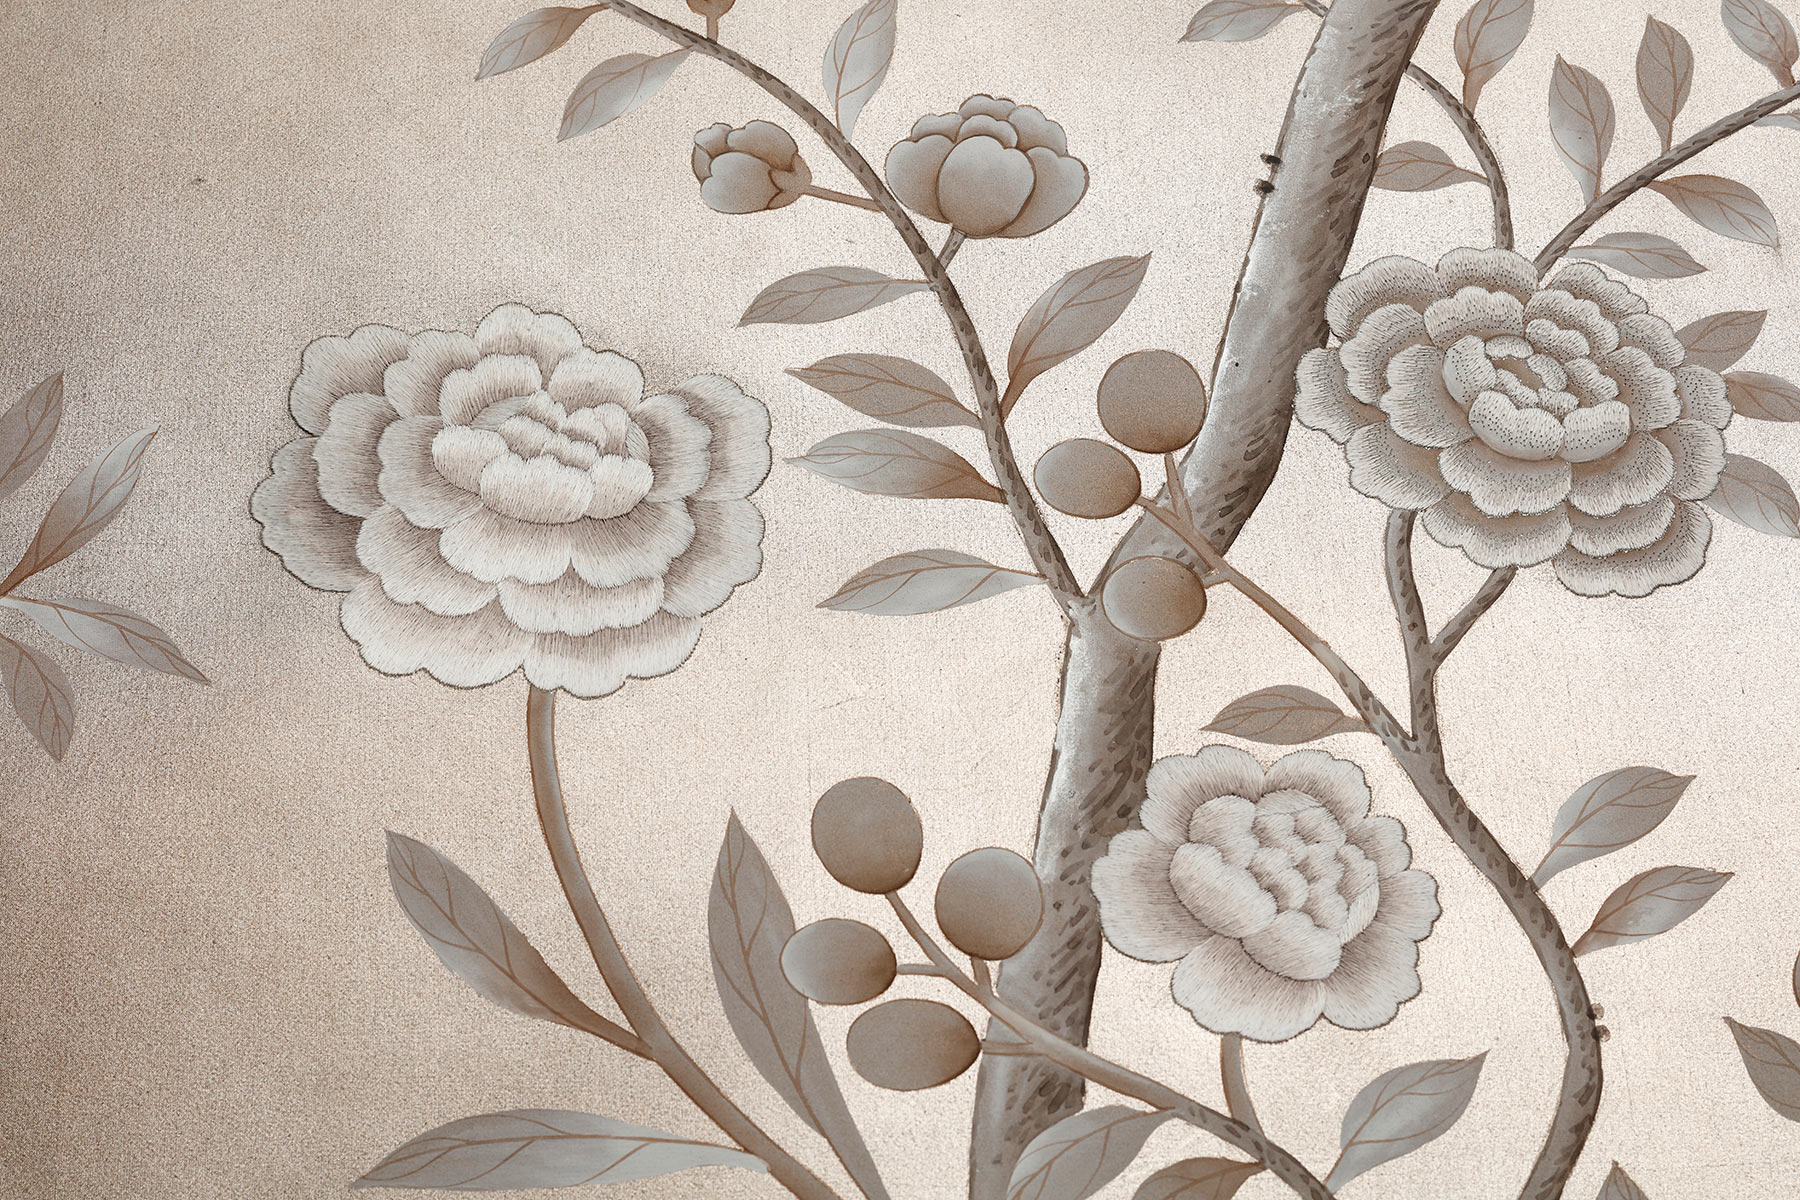 'Salon Vert' in Special Colourway SC-113 design colours on Pewter gilded silk with hand embroidery